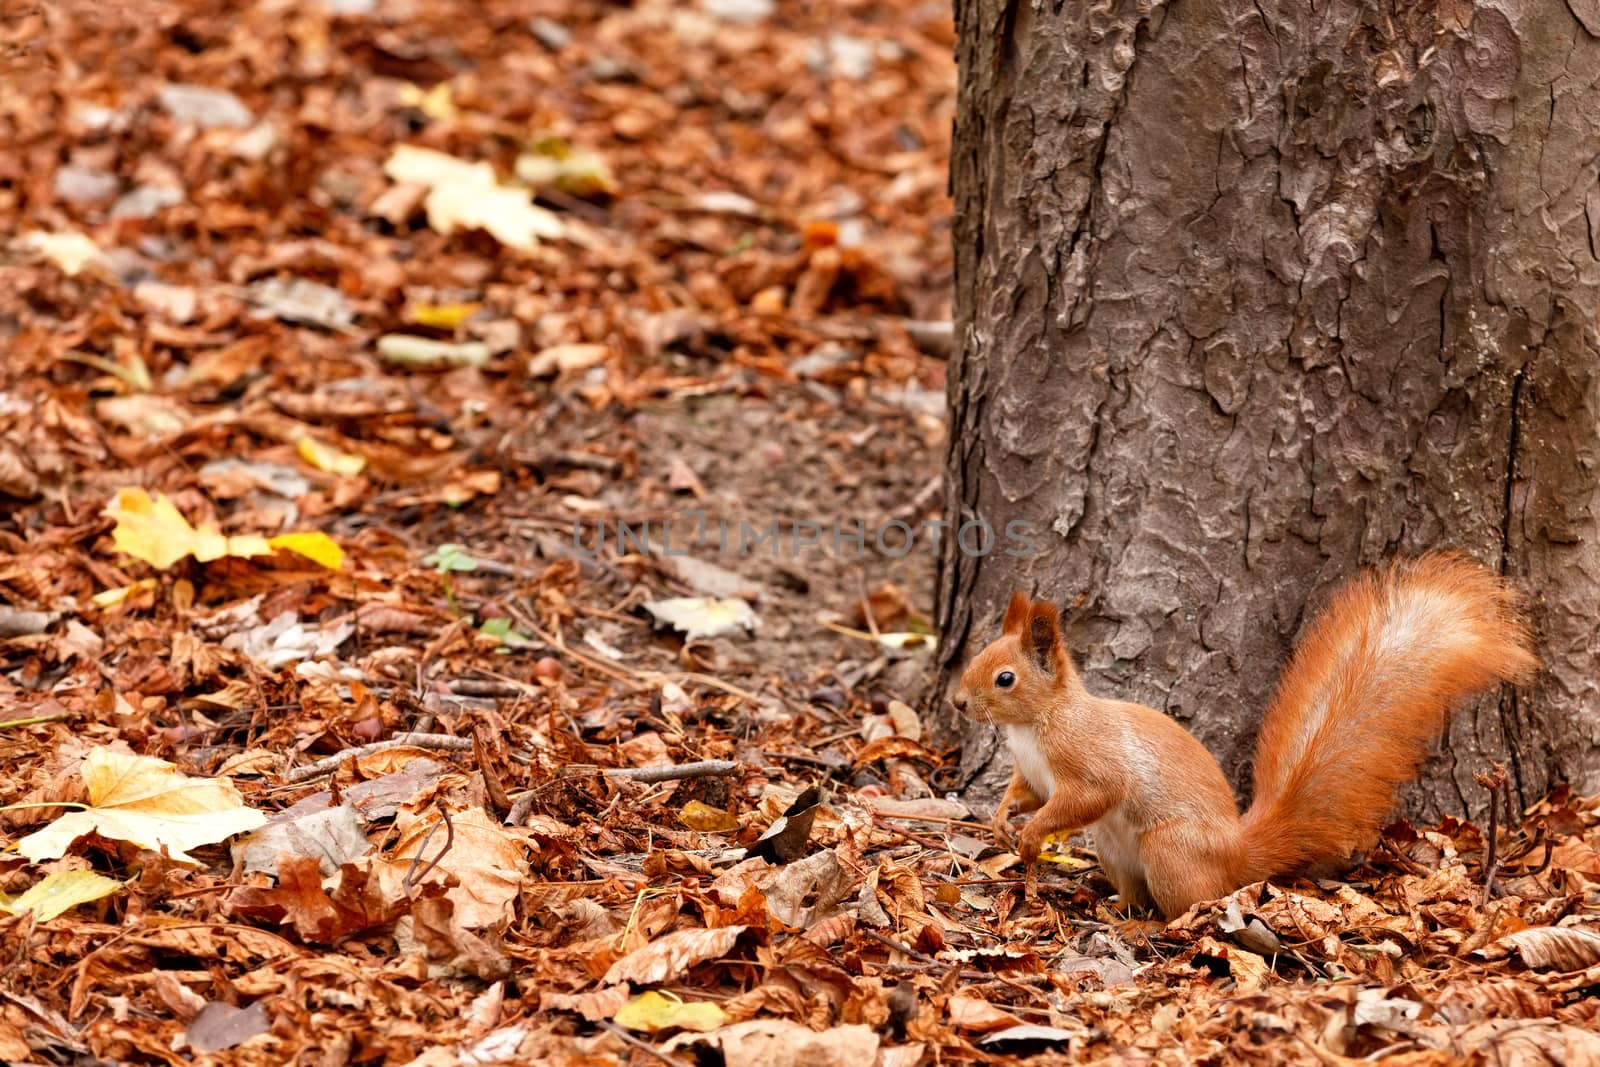 Portrait of an orange fluffy squirrel against the background of fallen leaves in the forest, who carefully listens to the surroundings.